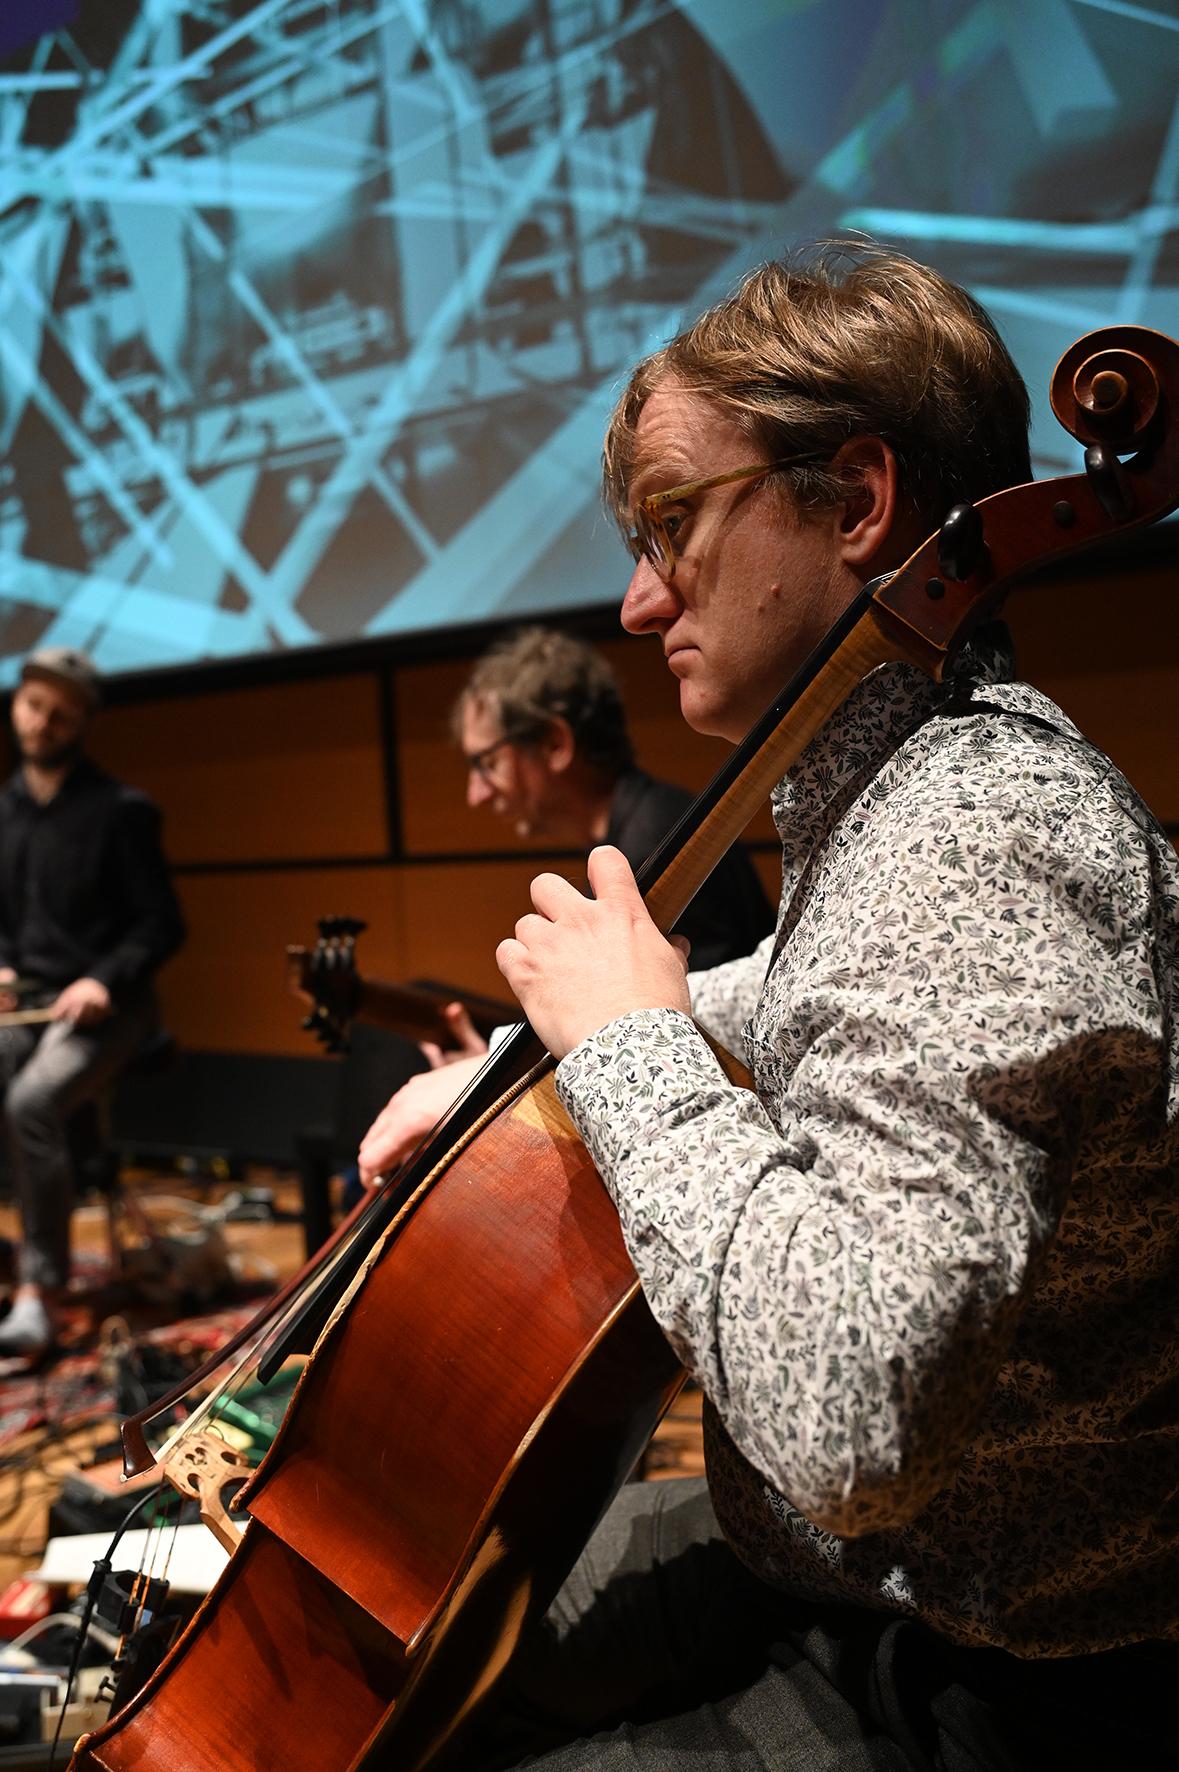 You can see Hugo Smit playing the cello from the band »Polytheistic Ensemble«..